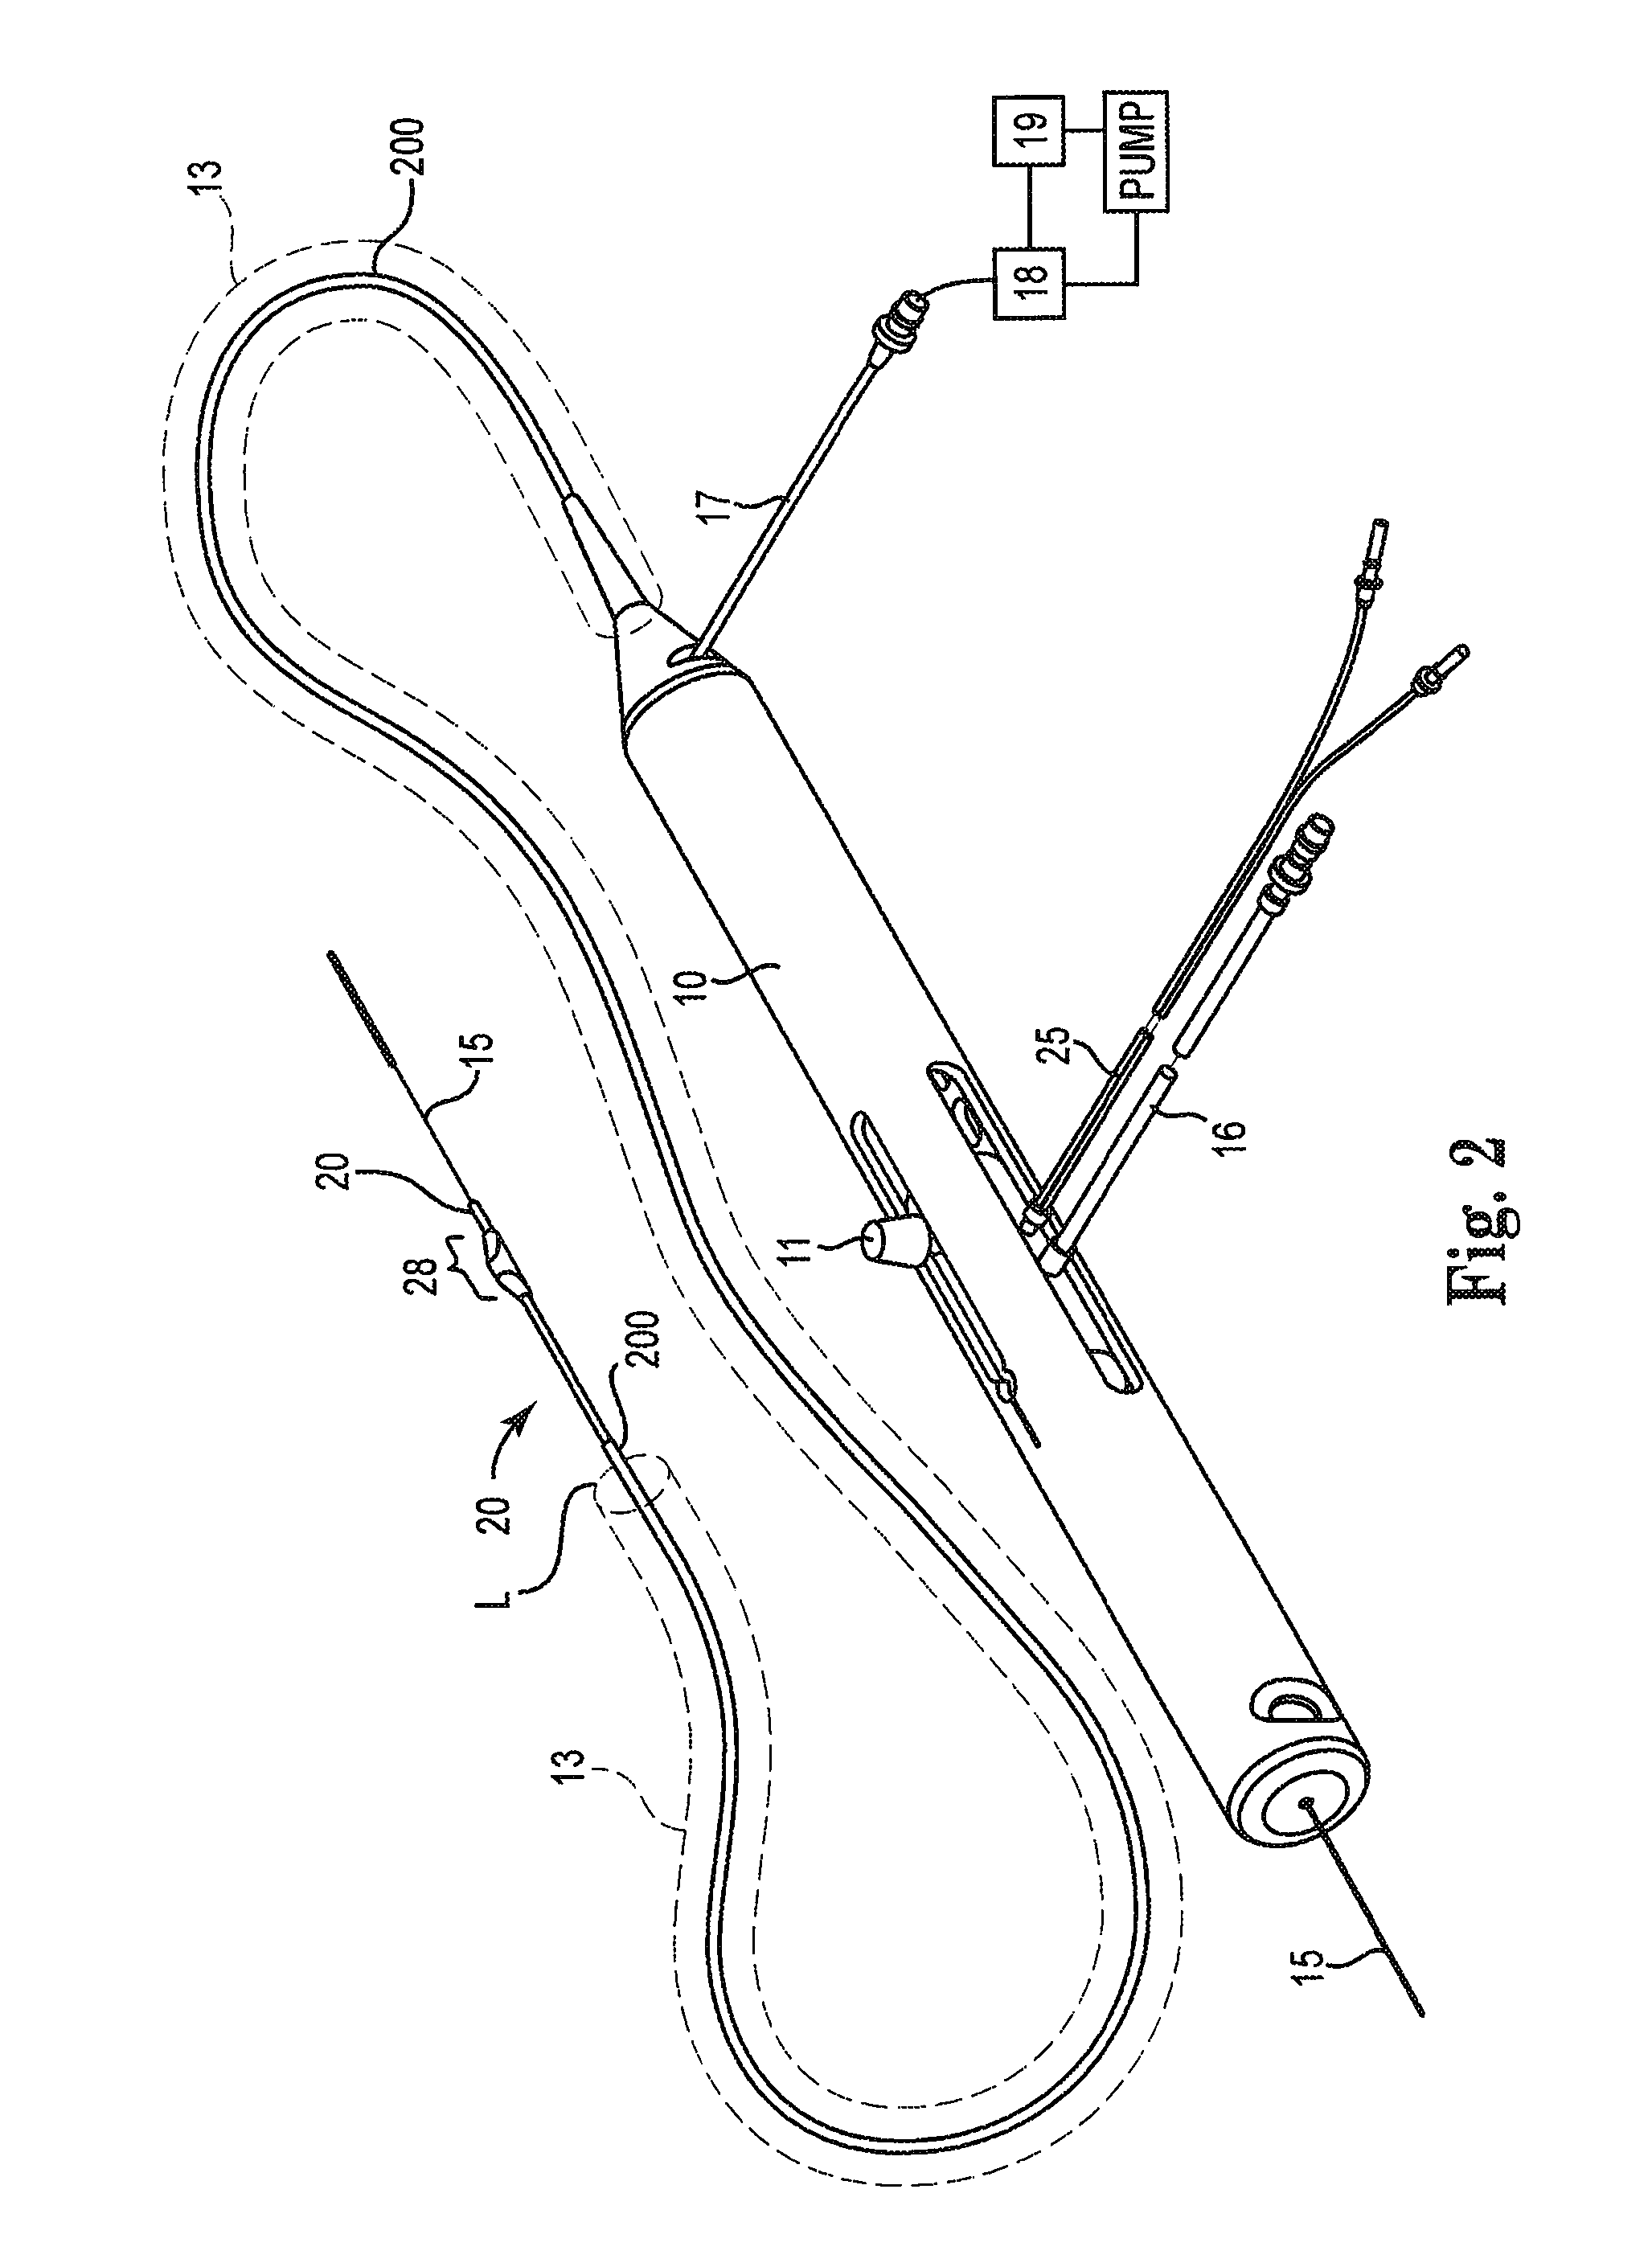 High-speed rotational atherectomy system, device and method for localized application of therapeutic agents to a biological conduit